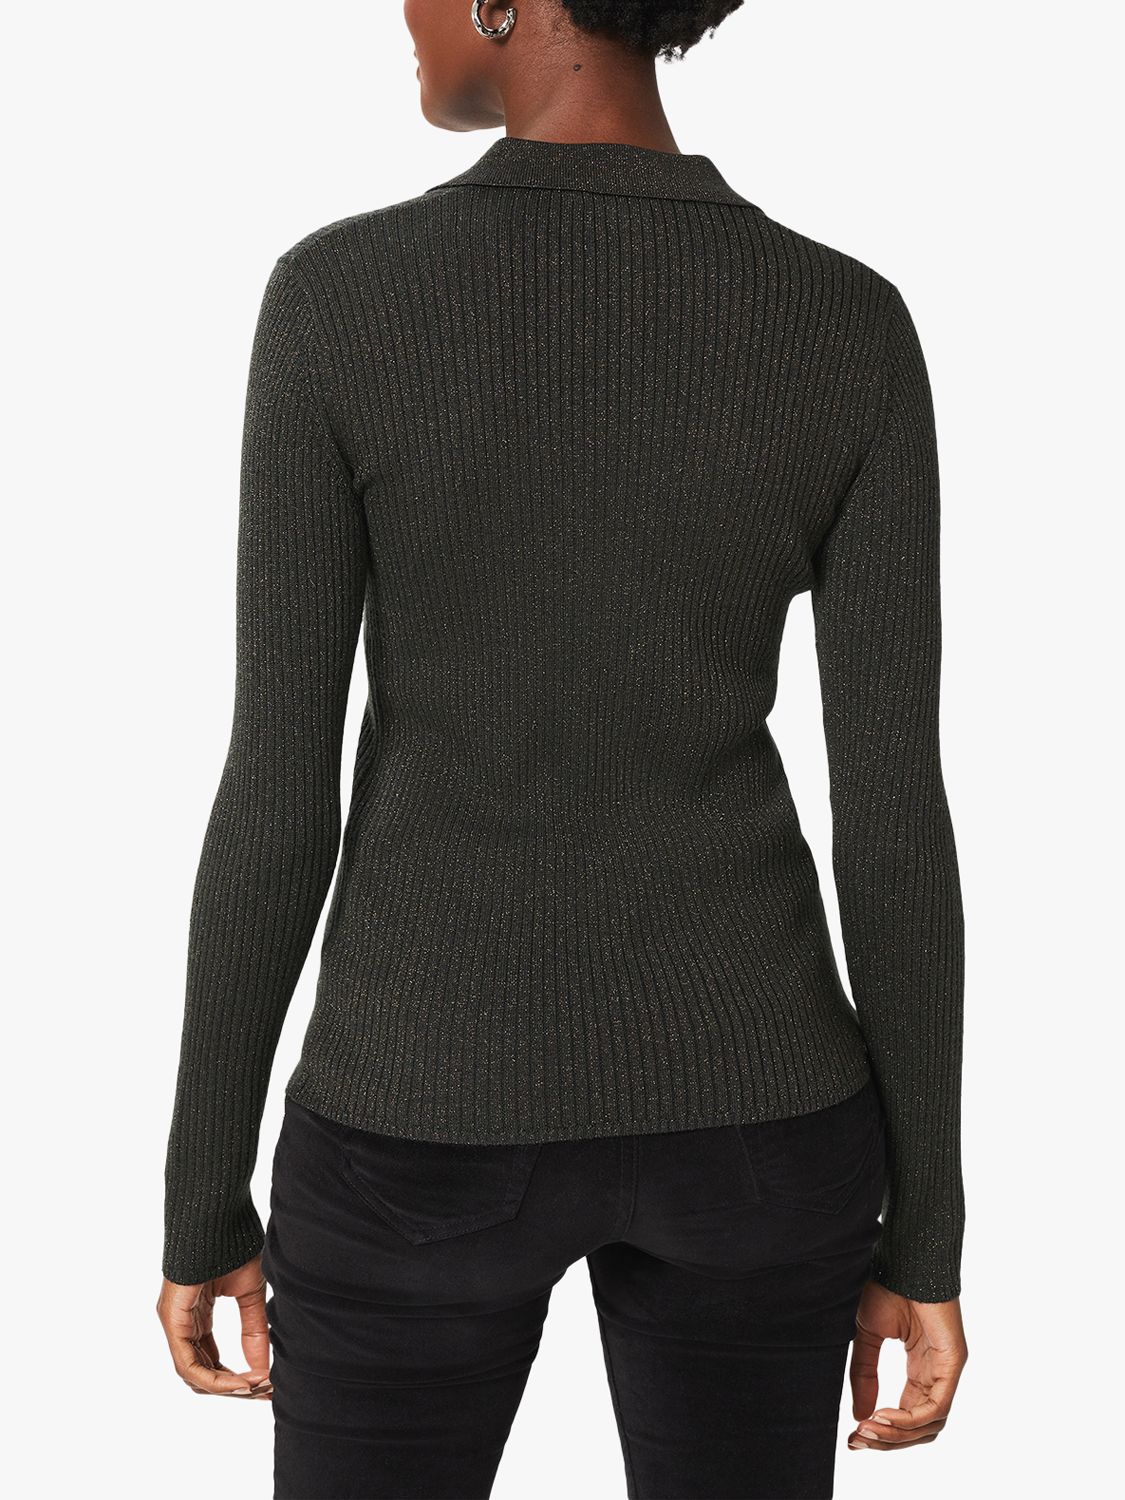 Buy Hobbs Alexis Sparkle Knitted Jumper, Green/Gold Online at johnlewis.com